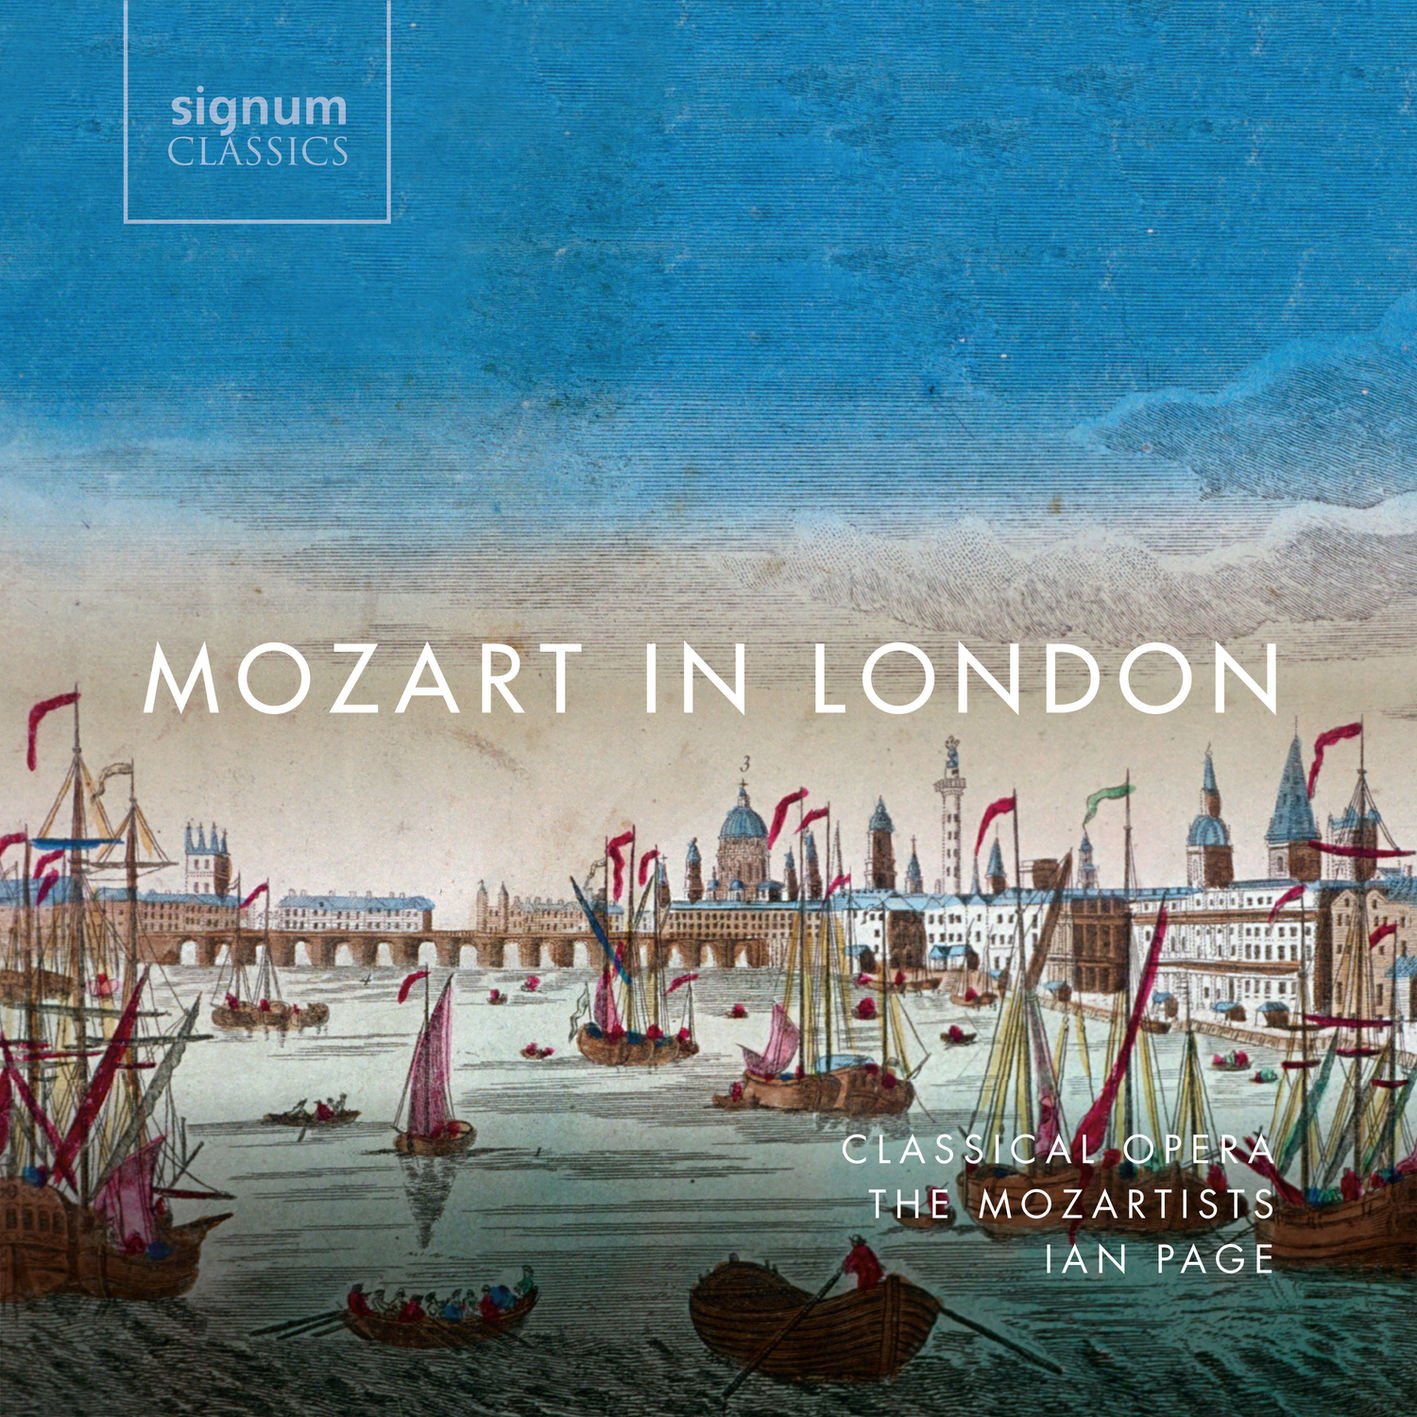 Ian Page & Classical Opera / The Mozartists – Mozart in London (2018) [FLAC 24bit/96kHz]